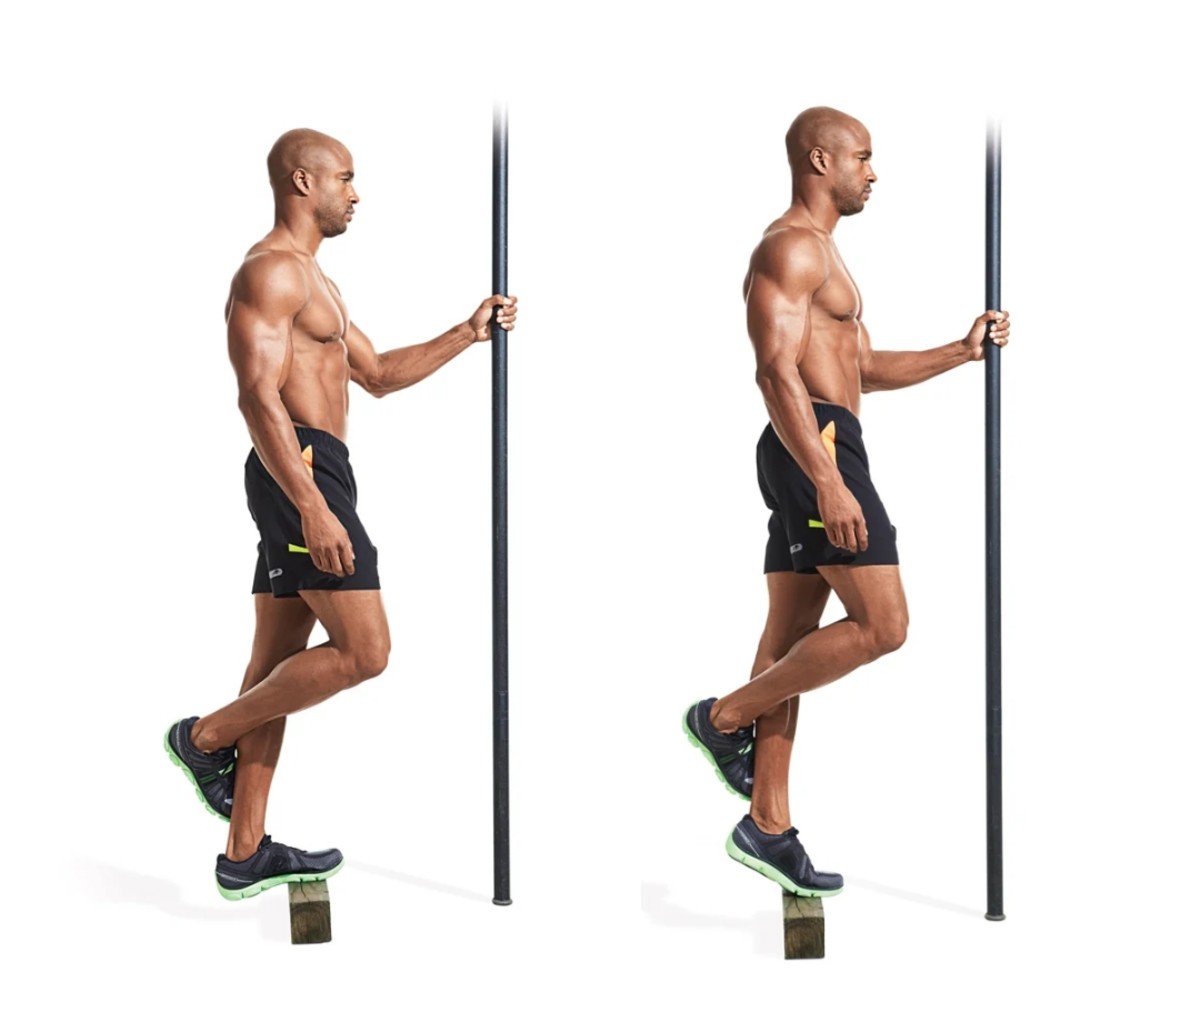 20 Best Calf Exercises At Home: Calf Raises, Lunges and More